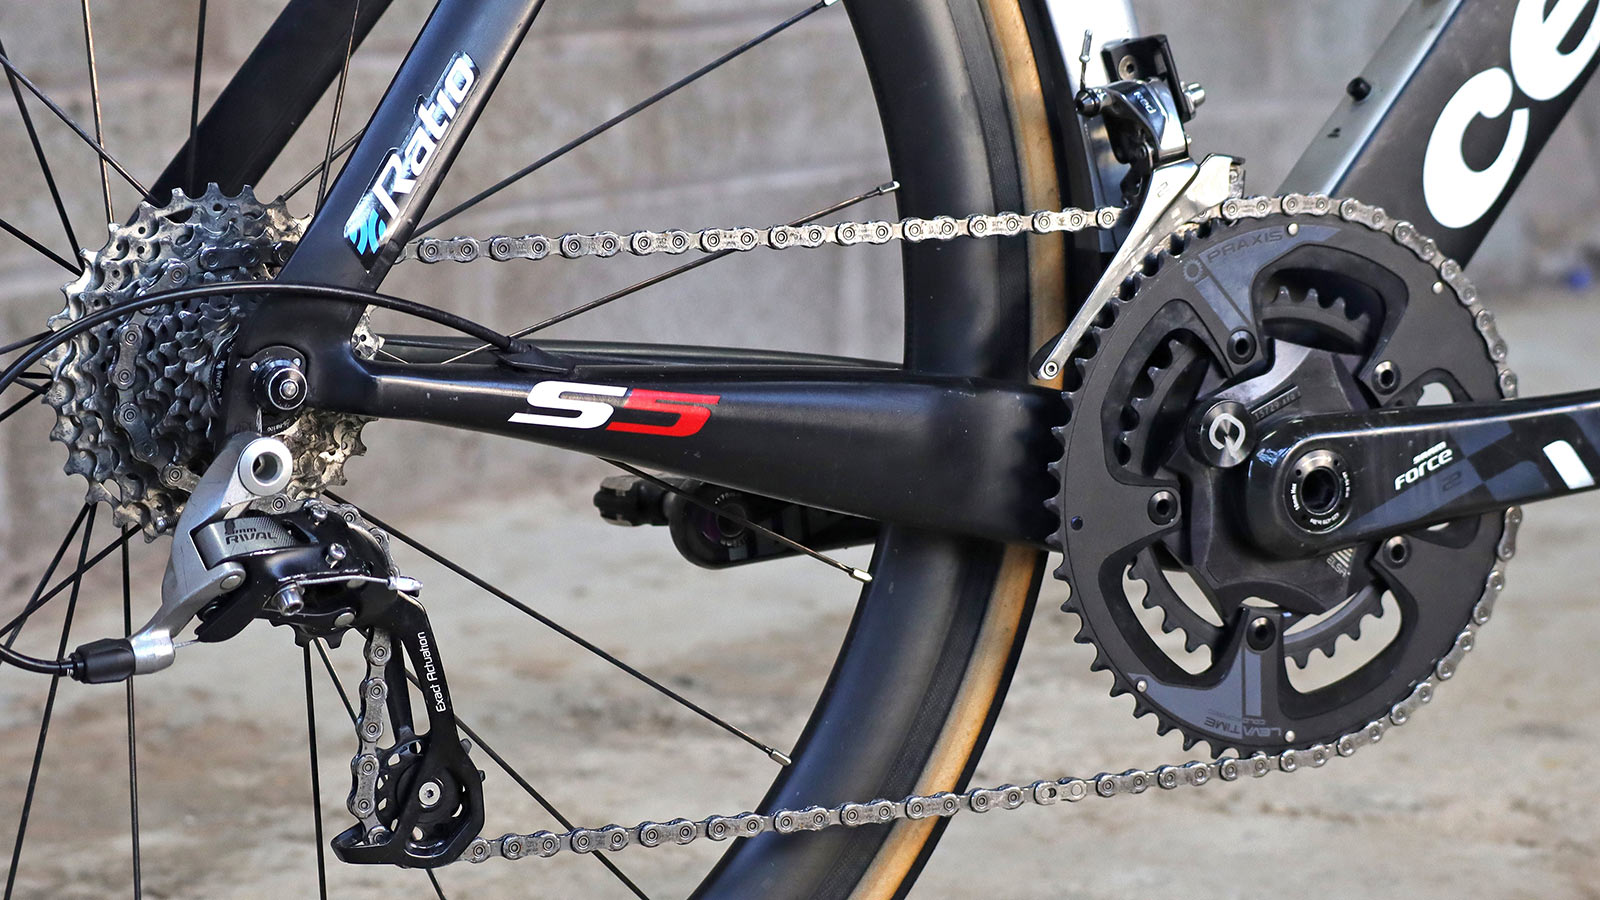 Ratio 2x12SH Upgrade Kit, mashup road SRAM 11sp and Shimano 12sp groupsets into SRAmano 12, Force & Rival group updated